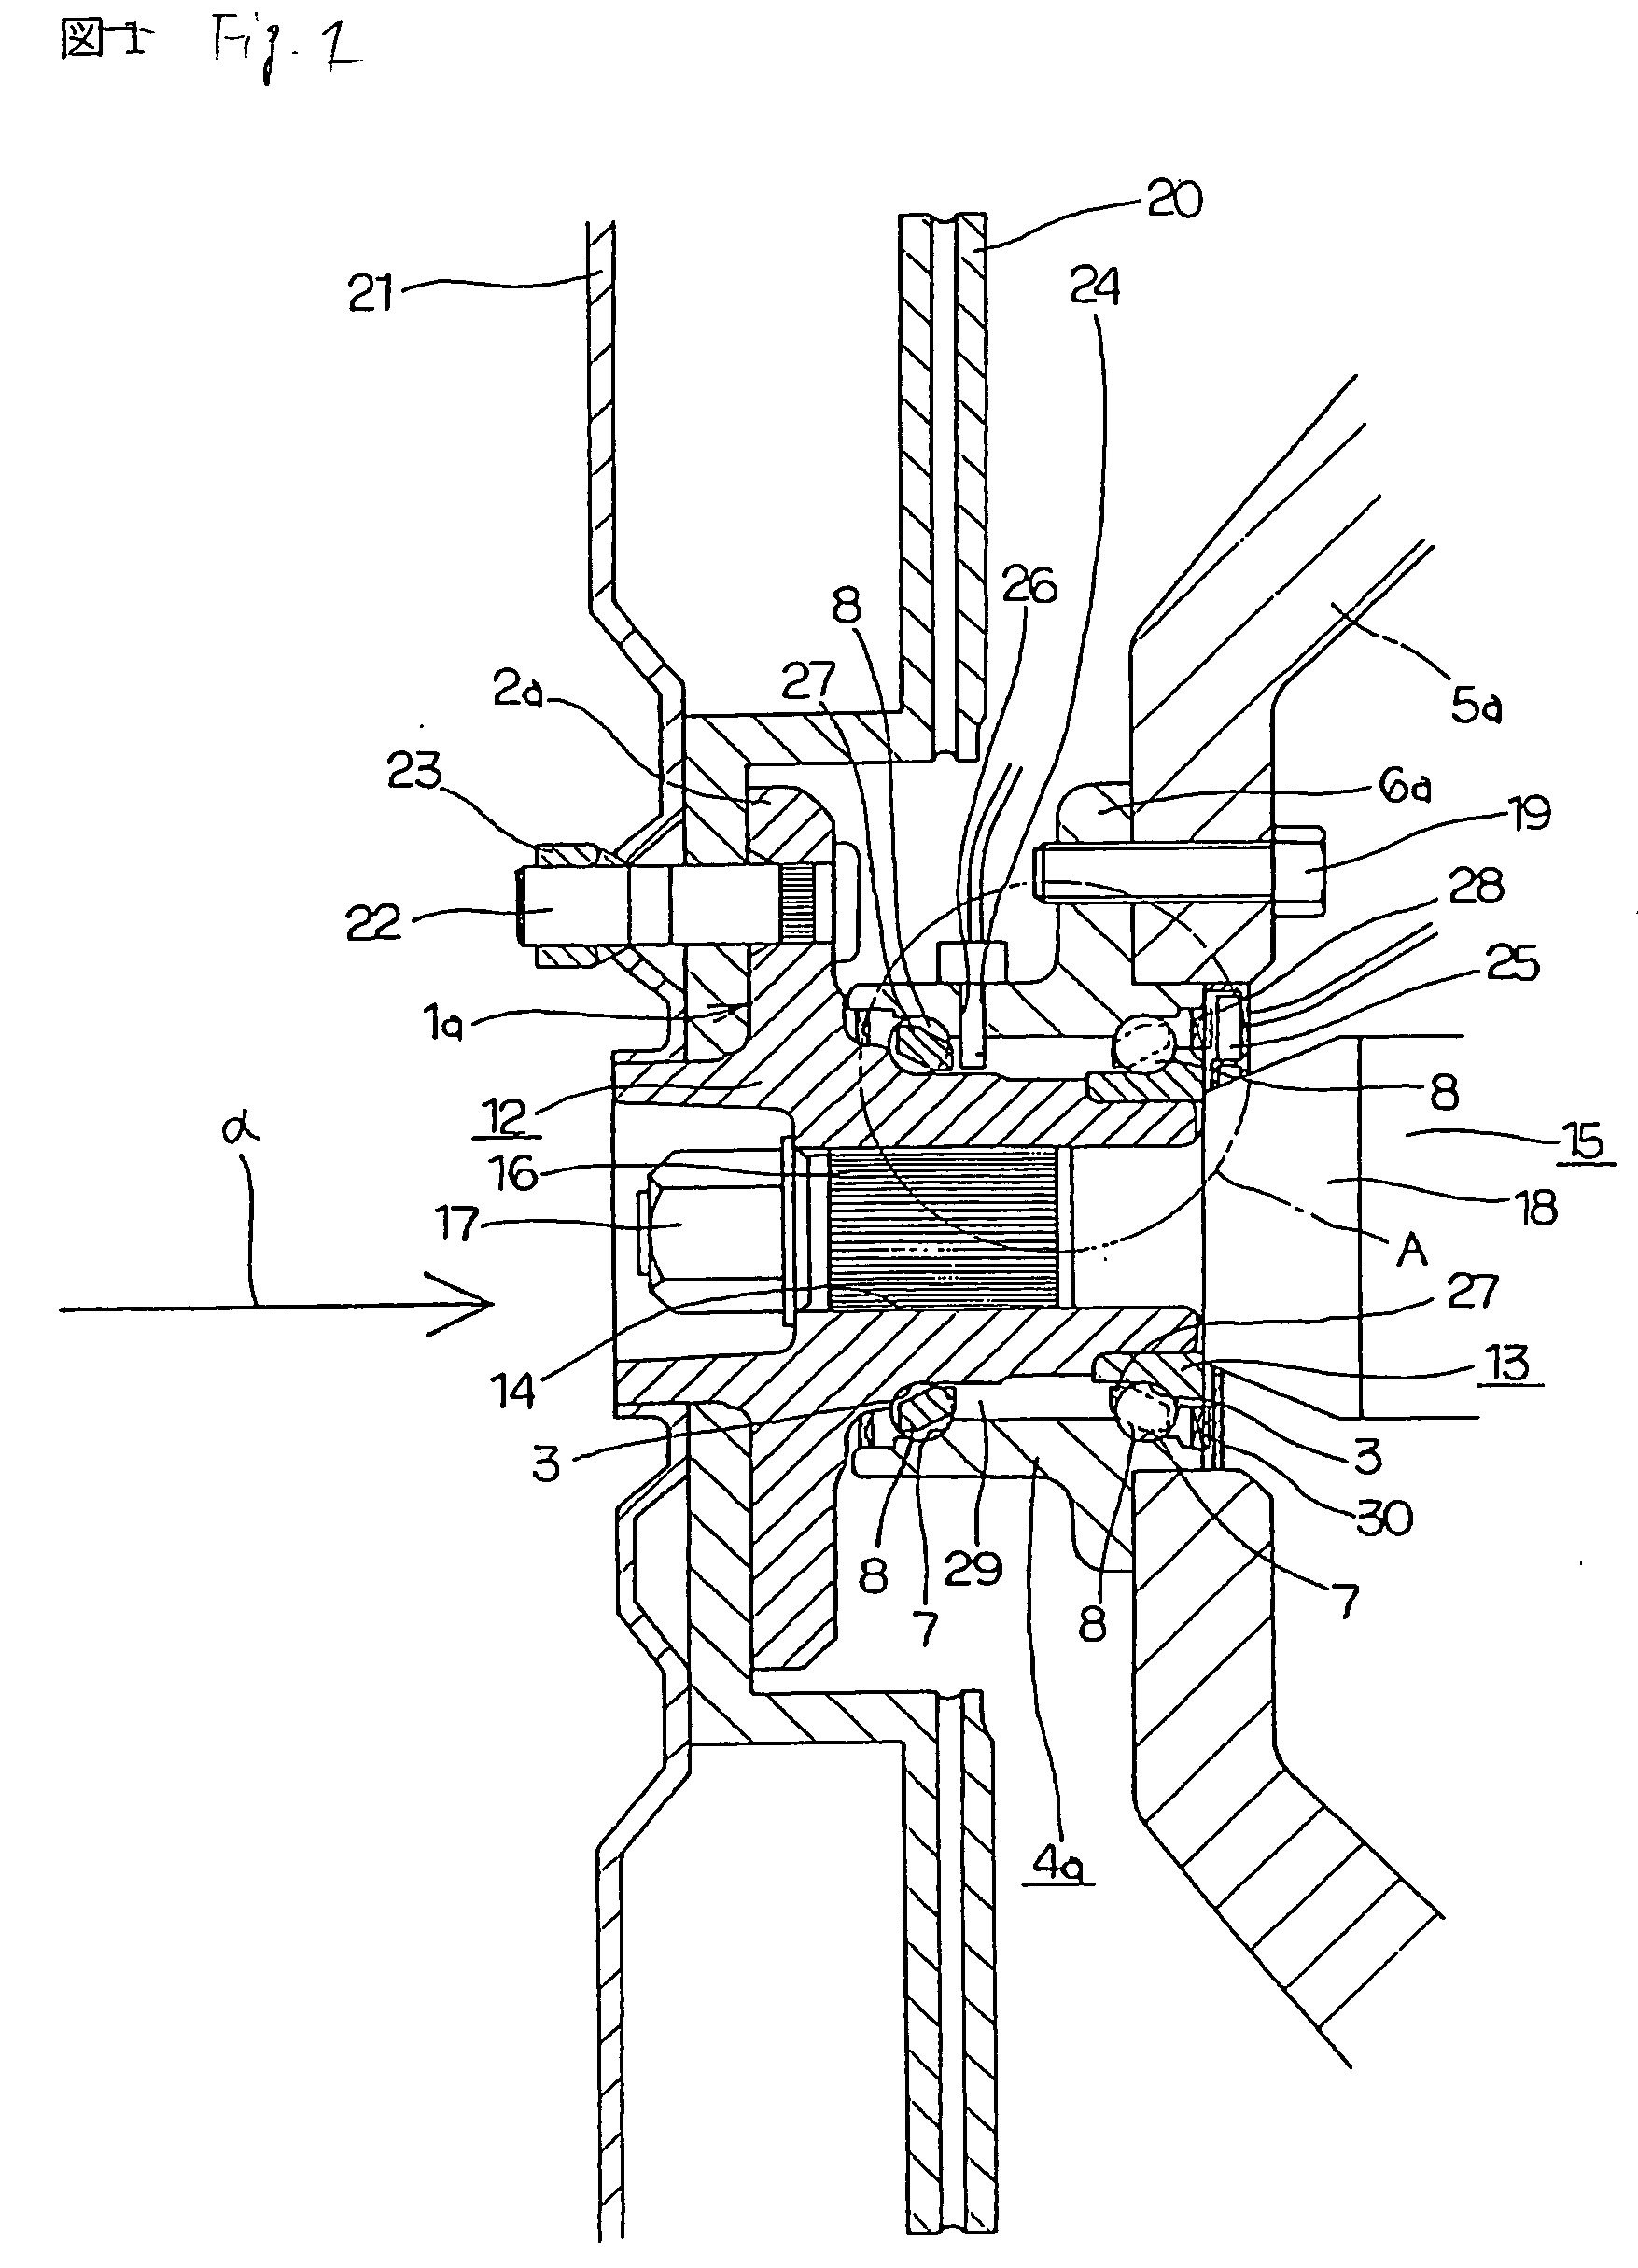 Load-measuring device for rolling bearing unit and rolling bearing unit for load measurement